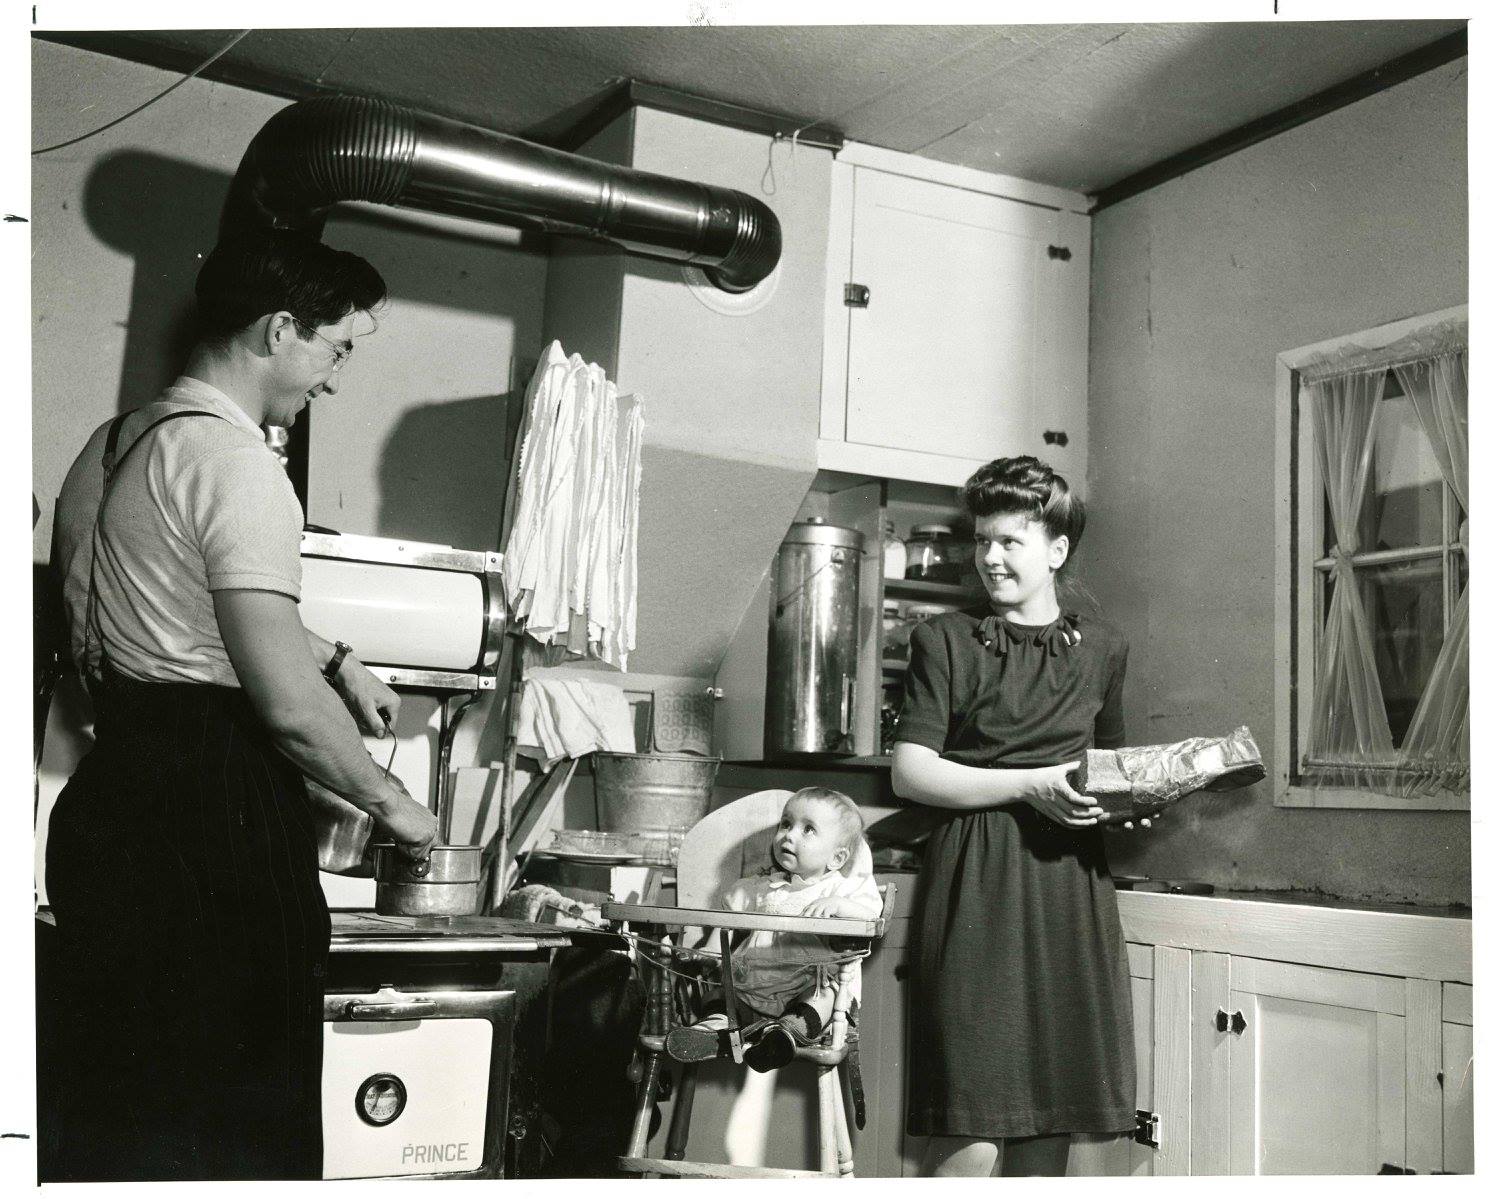 A photograph of a family inside the kitchen of a home in Veterans' Village at the University of Manitoba Campus. A man is standing at the stove with a pot, an infant is in a high chair, and a woman appears to be holding a loaf of bread and a bag in her hands. Photograph is dated as having been taken around 1948 by the National Film Board of Canada.